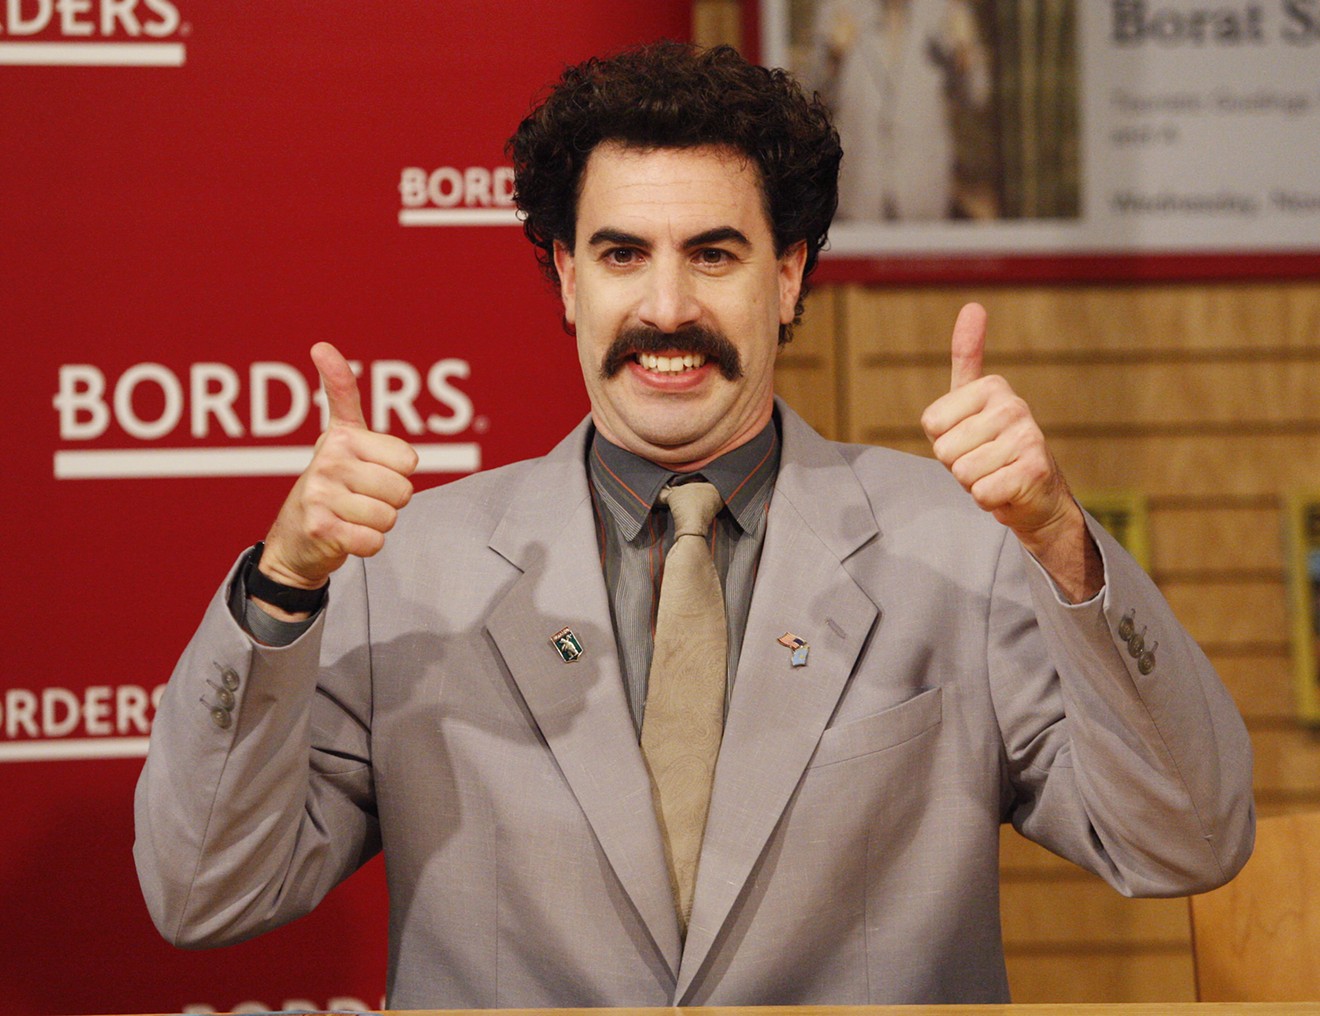 Borat had a "very nice" time in Texas. High five.